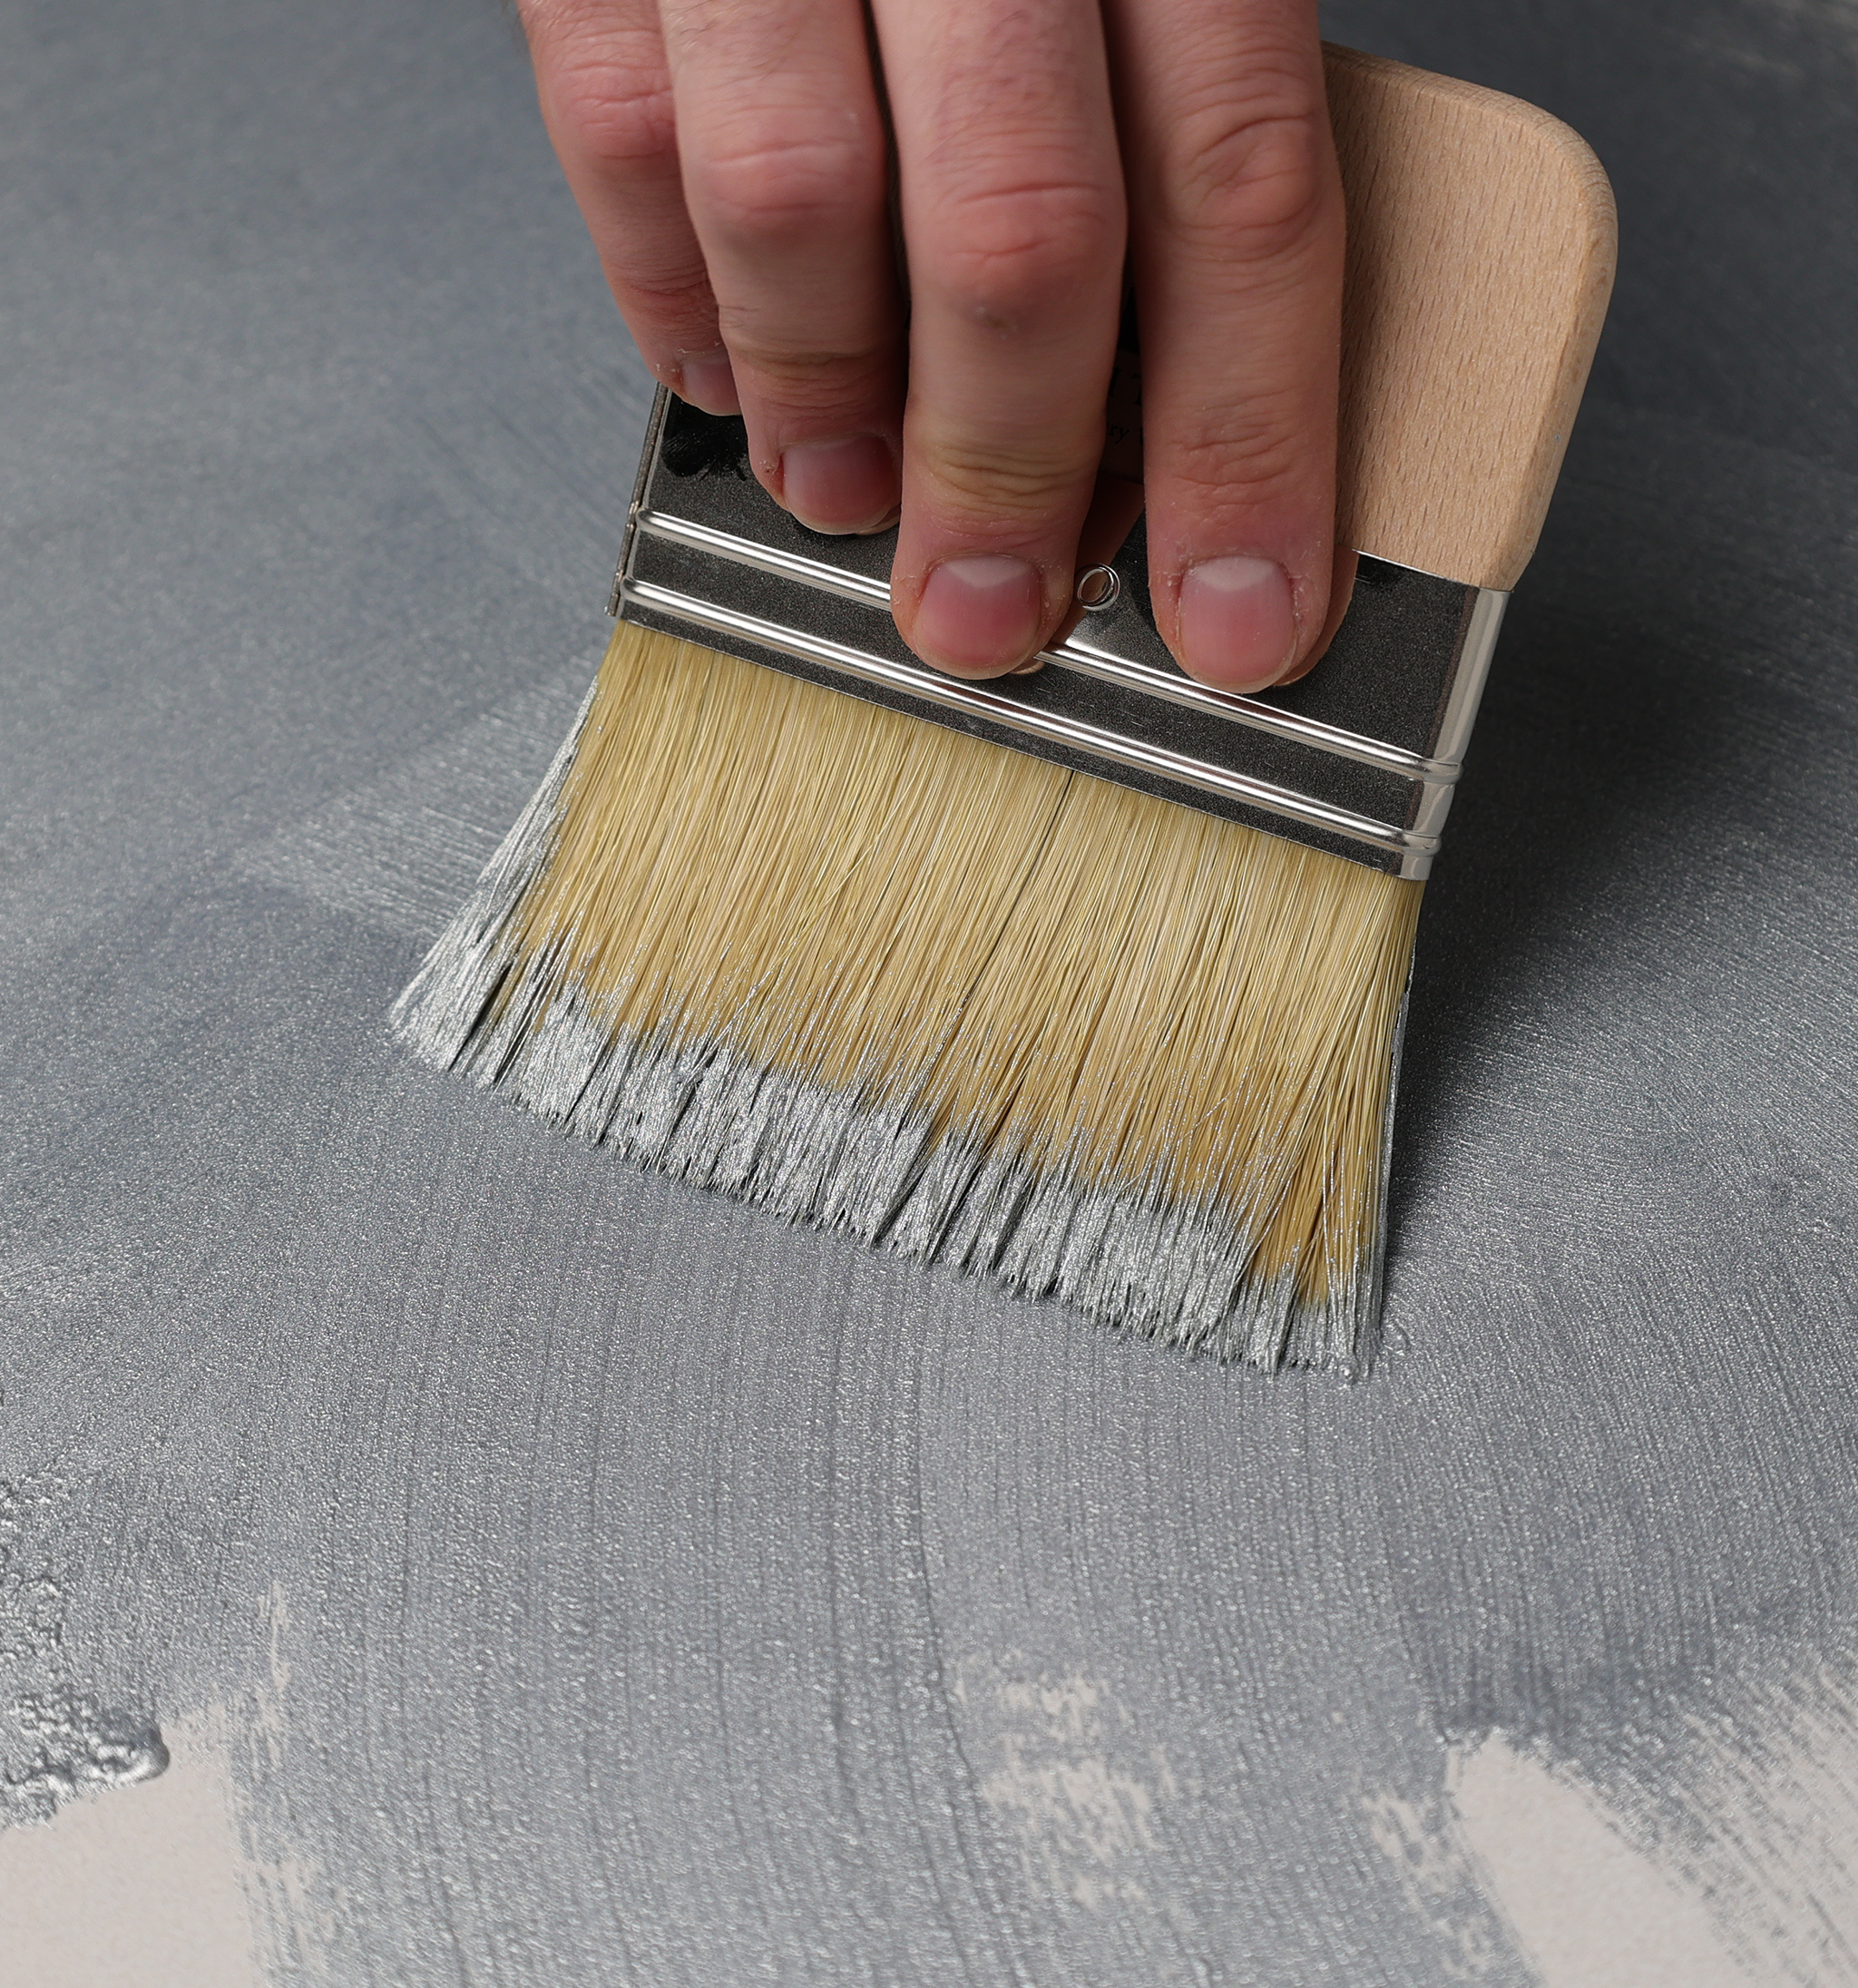 2-Day Luxury Paint Introduction - Discover the beauty of Italian Luxury paints